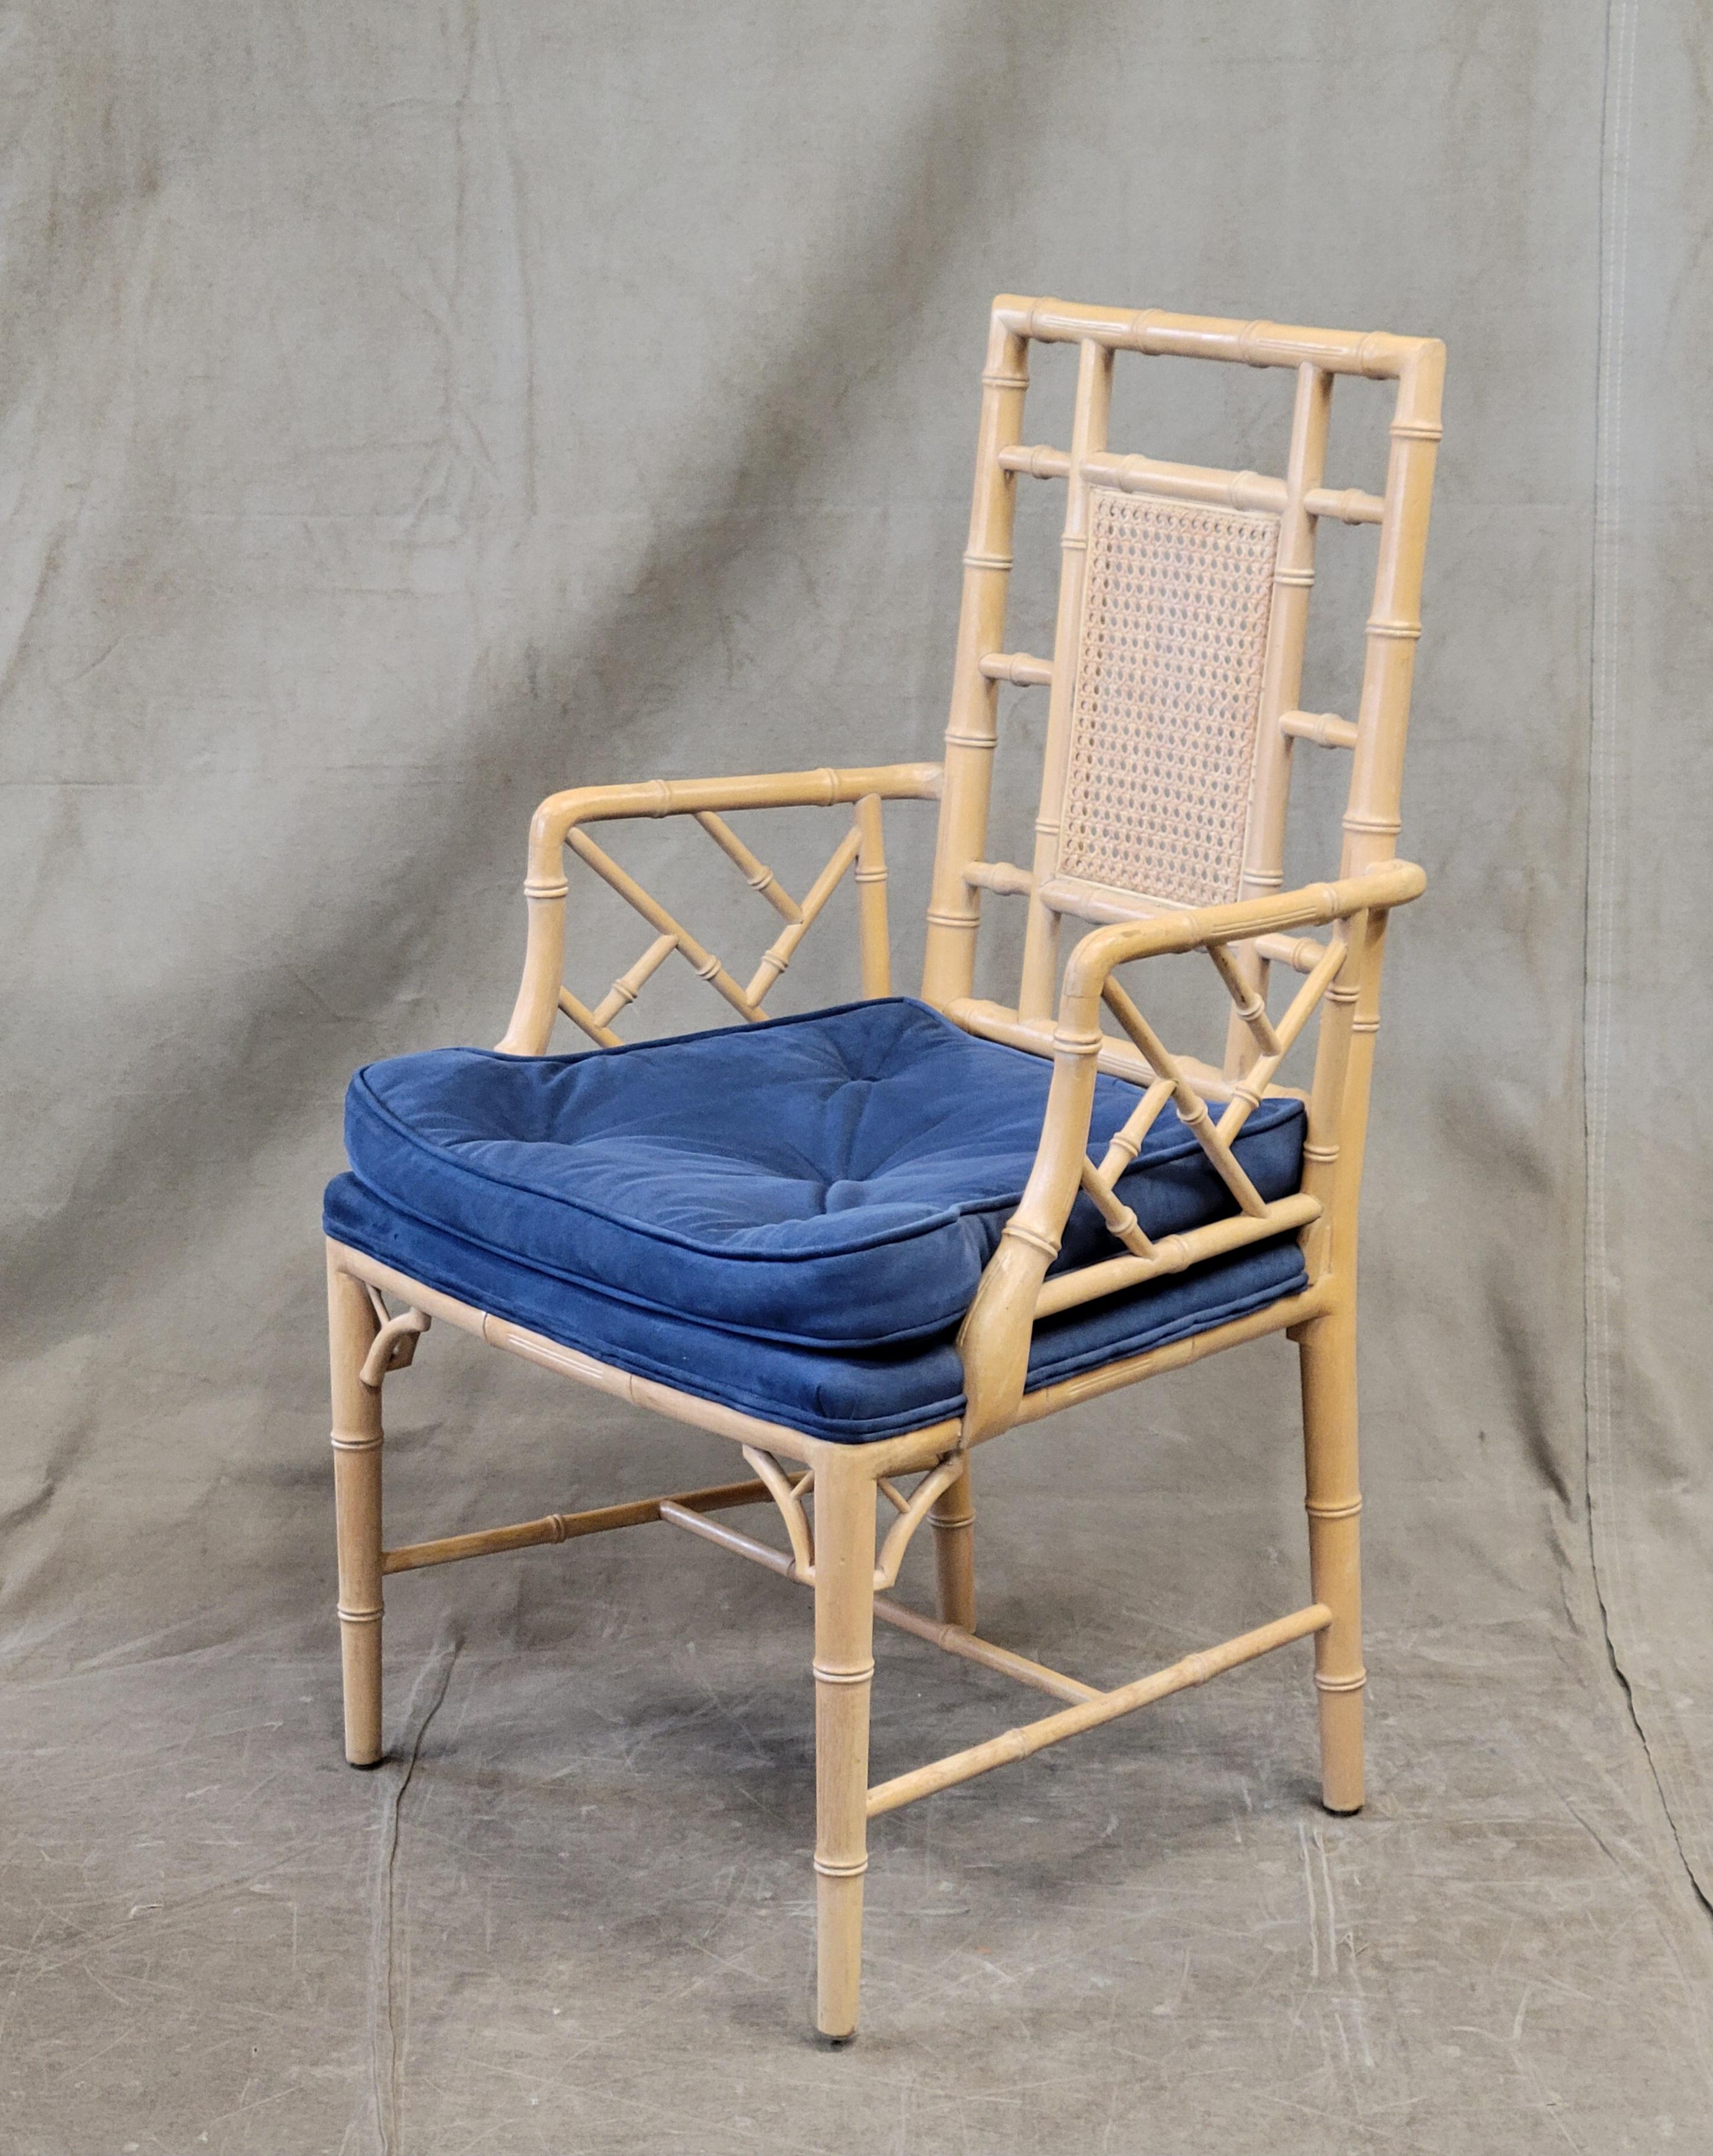 Vintage Faux Bamboo Chairs With Blue Cushions - a Pair In Good Condition For Sale In Centennial, CO